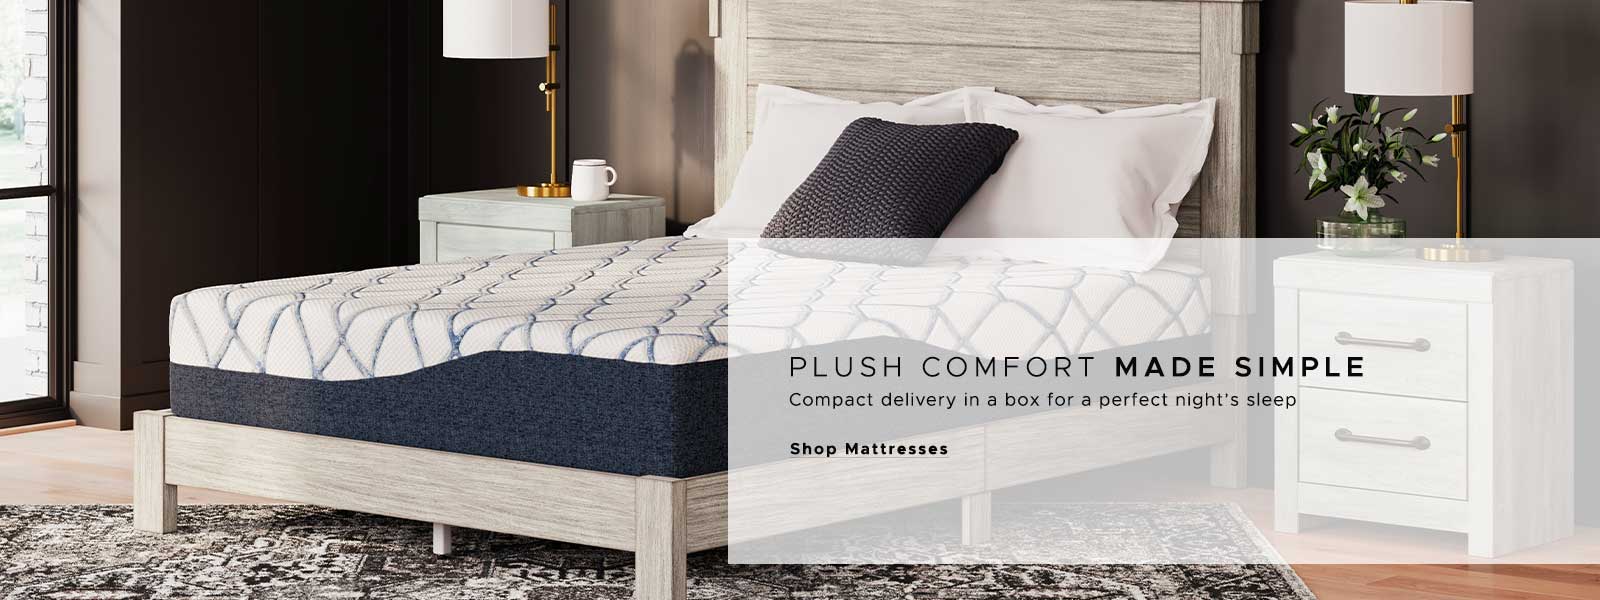 Homepage-Banners-Mattresses